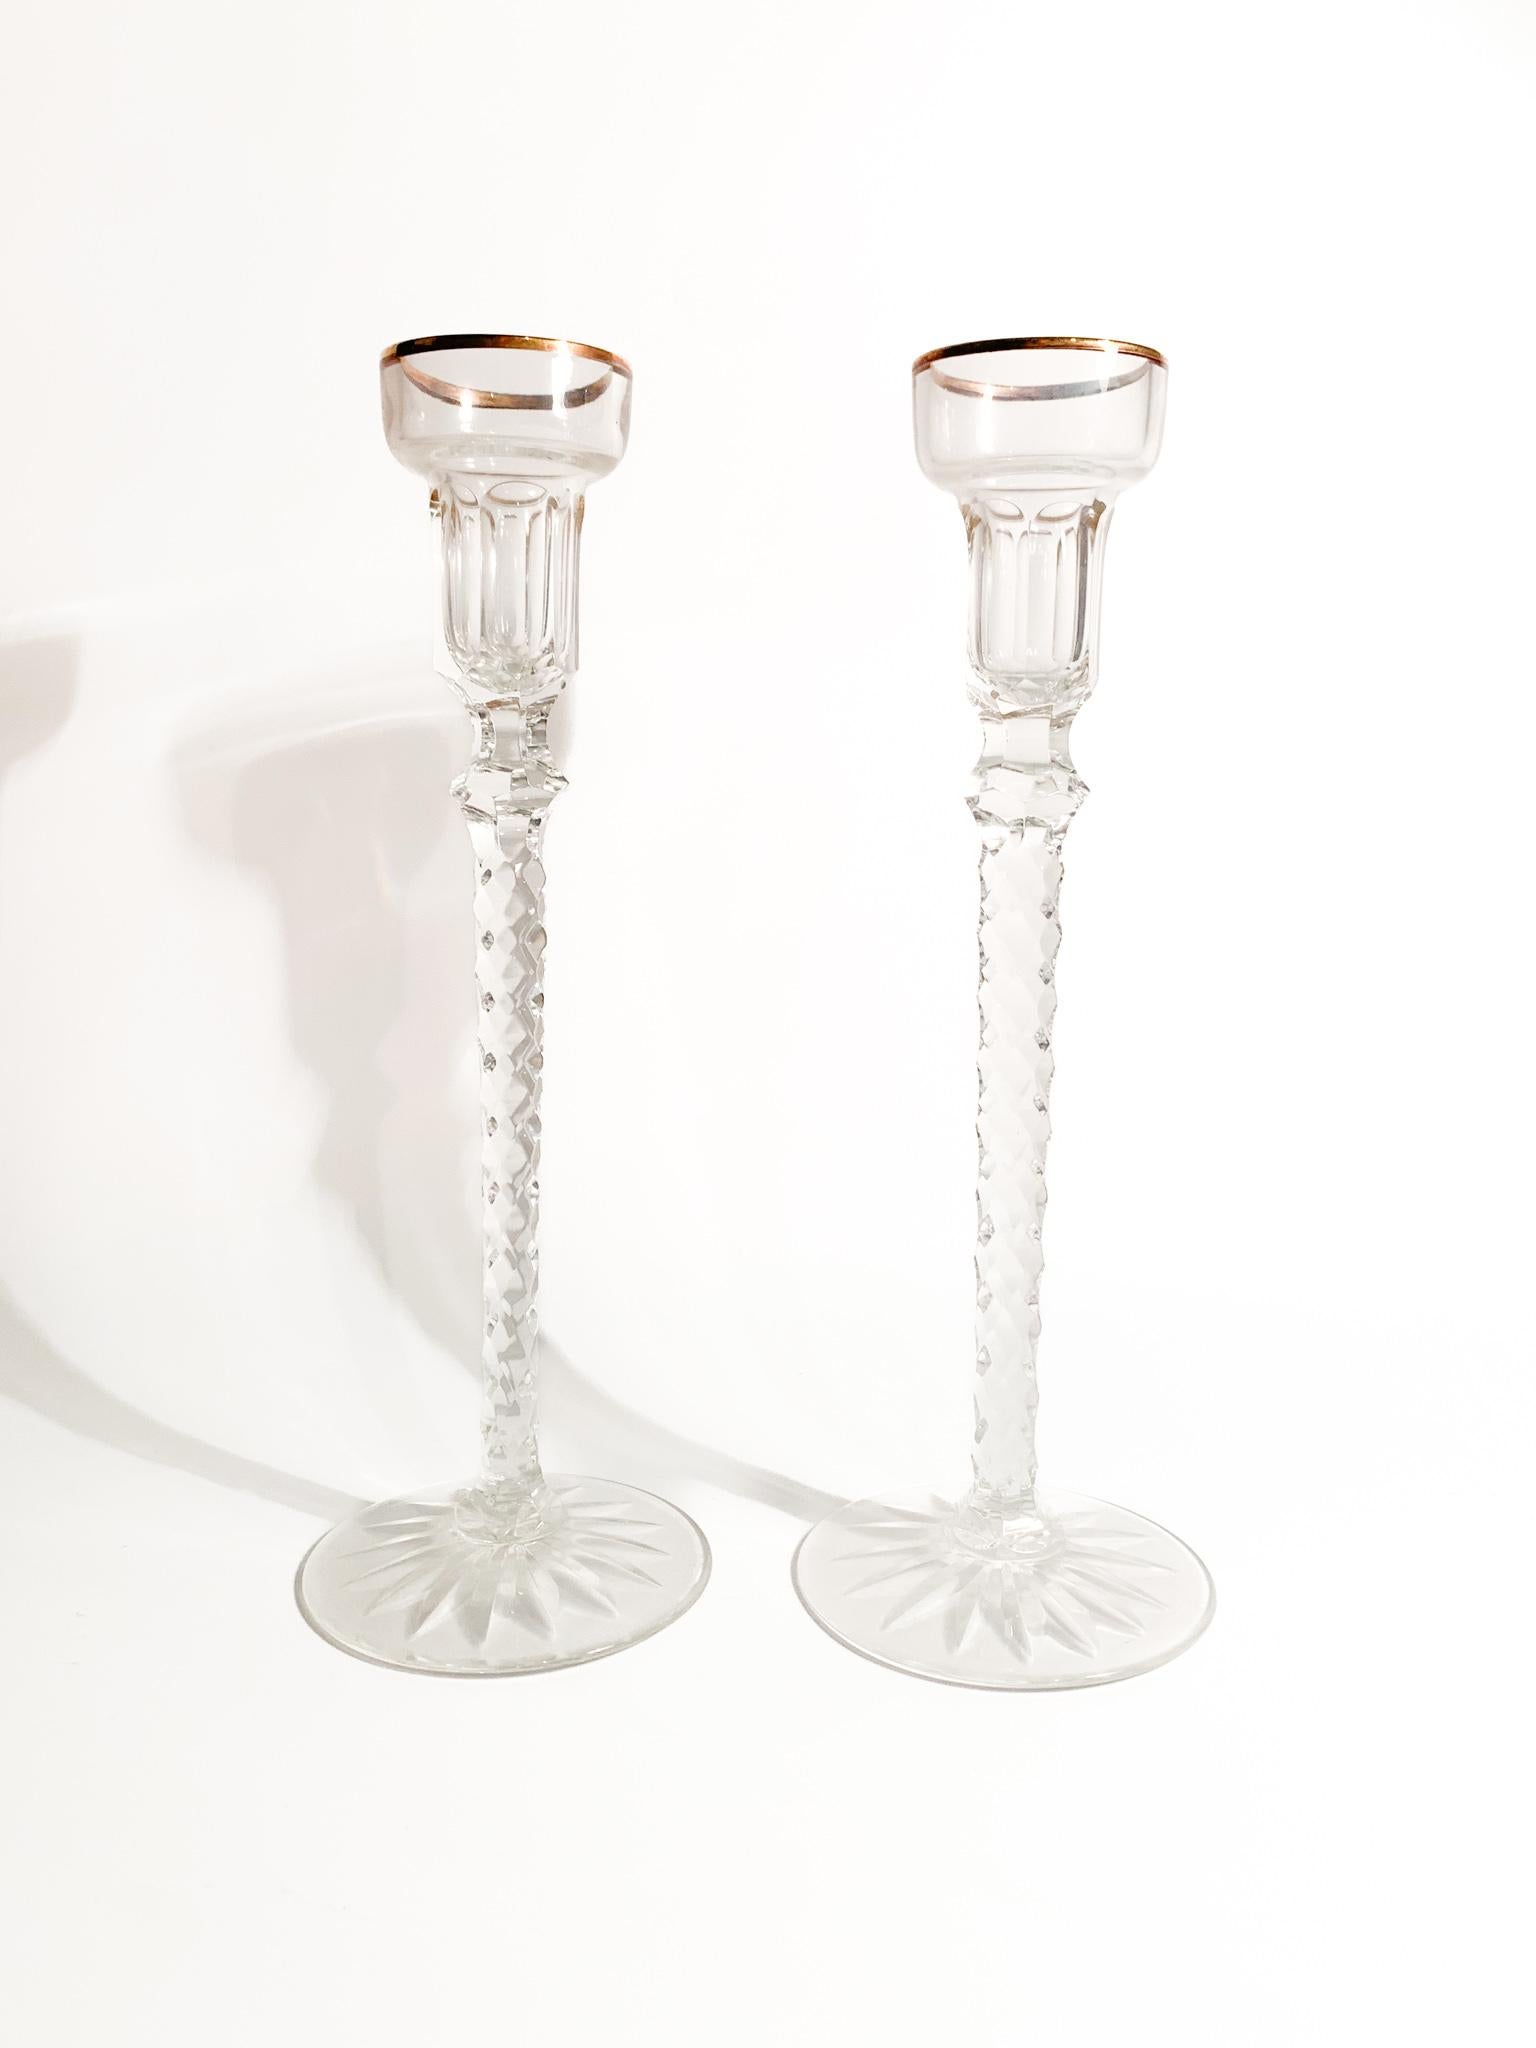 Pair of Fabergè Imperial Crystal Candlesticks Michael Palace 1940s 1